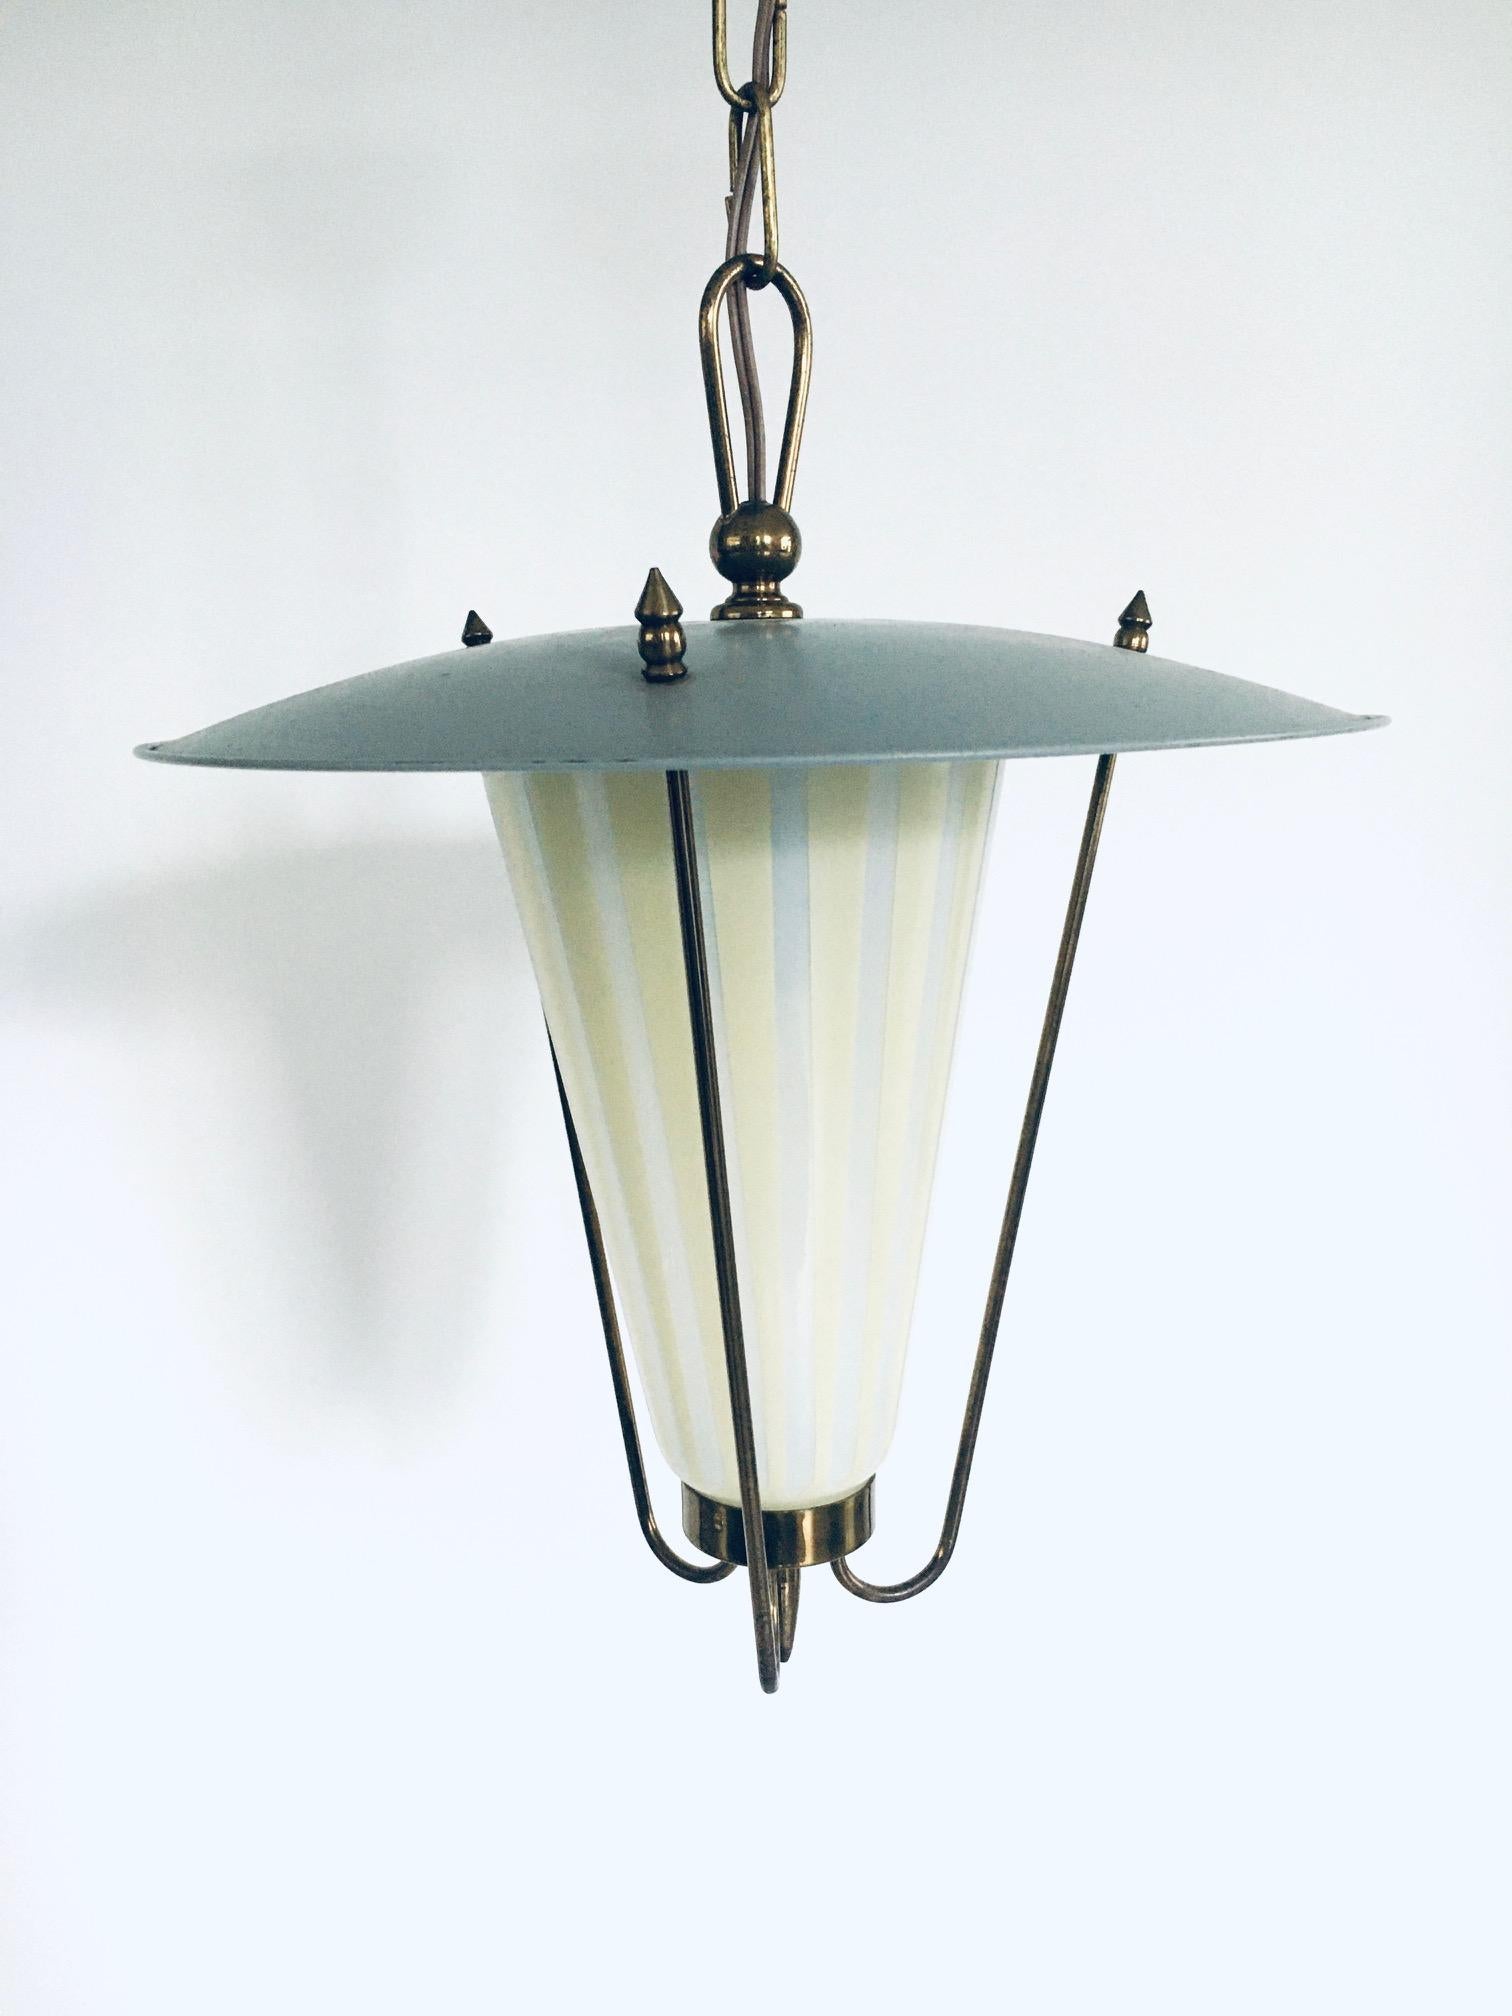 Vintage 1950's Midcentury Modern Atomic Age Design pendant Lantern Hanging Lamp. Made in France, 1950's. Metal and brass with 2 color glass shade. In very good condition. Measures 39cm x 32cm x 32cm.